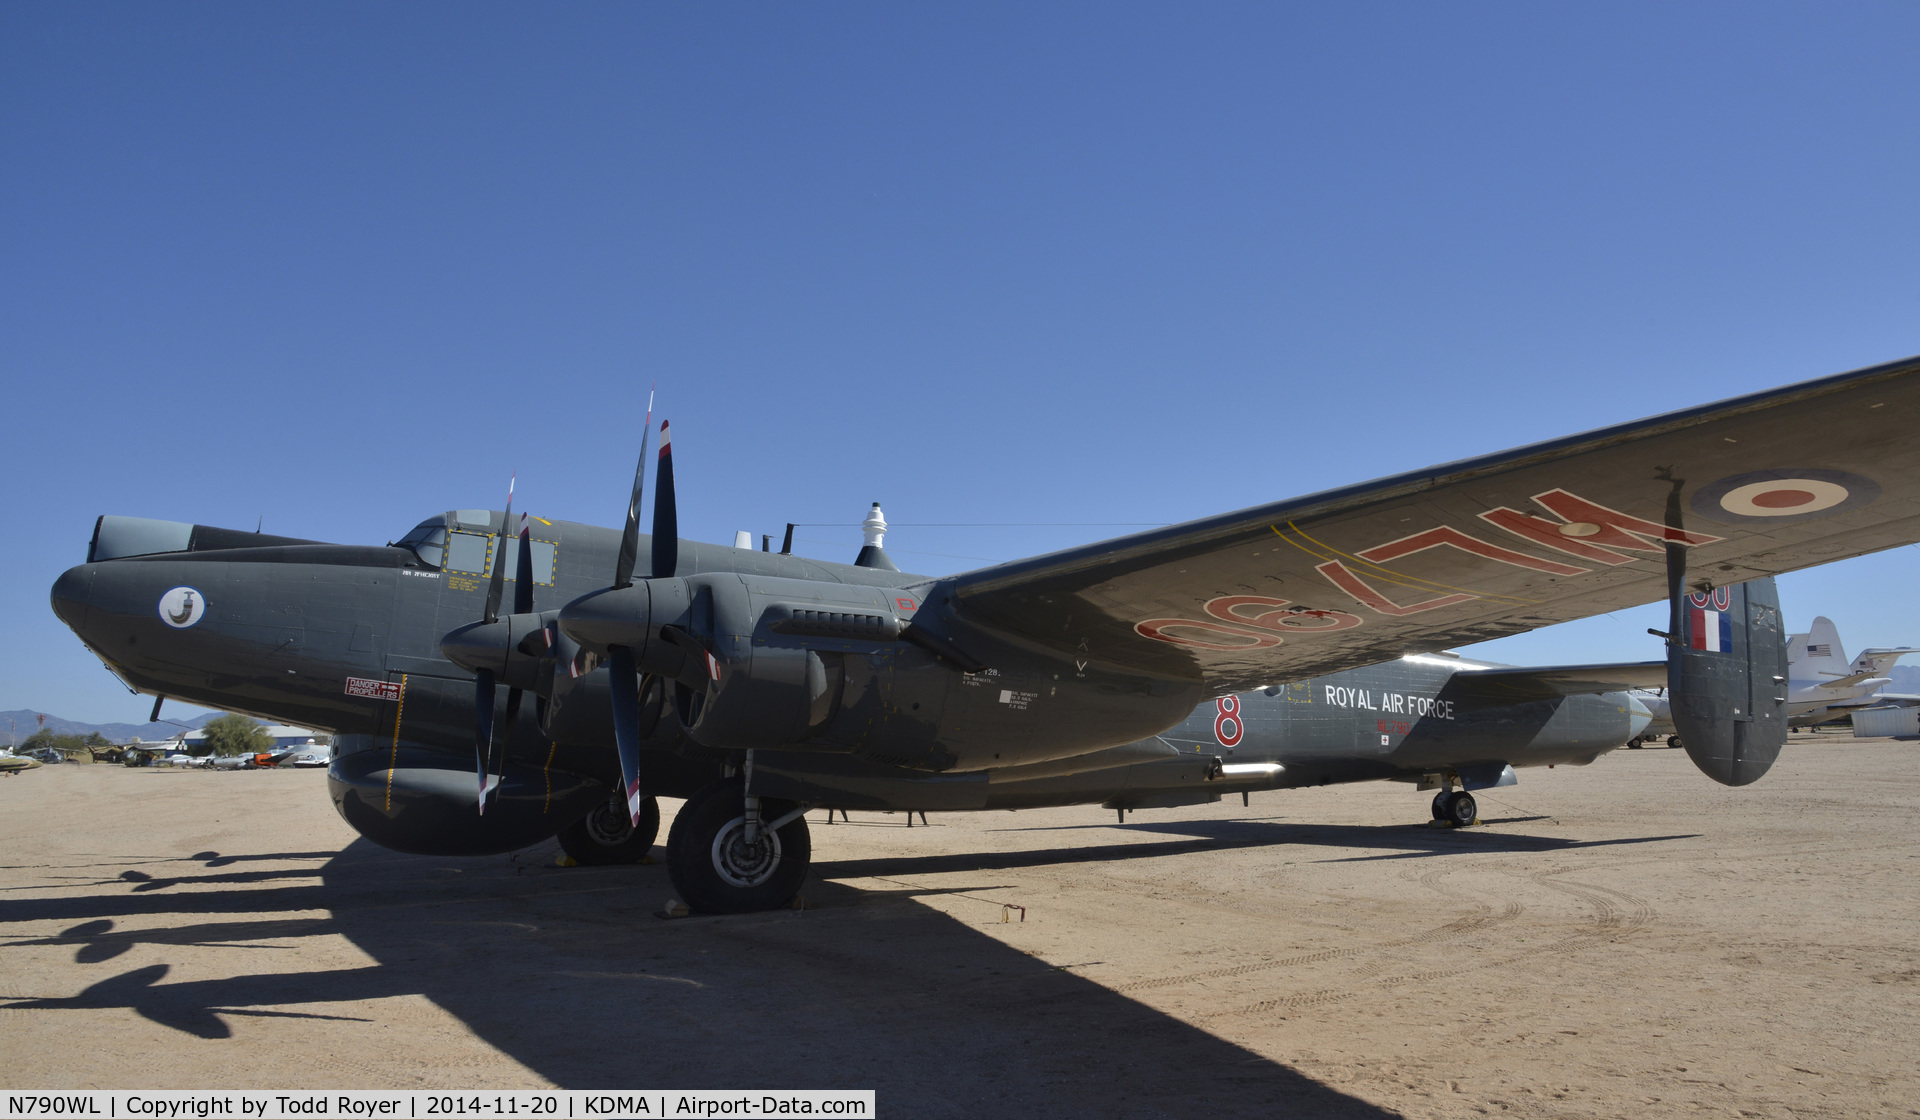 N790WL, 1954 Avro 716 Shackleton AEW.2 C/N R3/696/239009, On display at the Pima Air and Space Museum